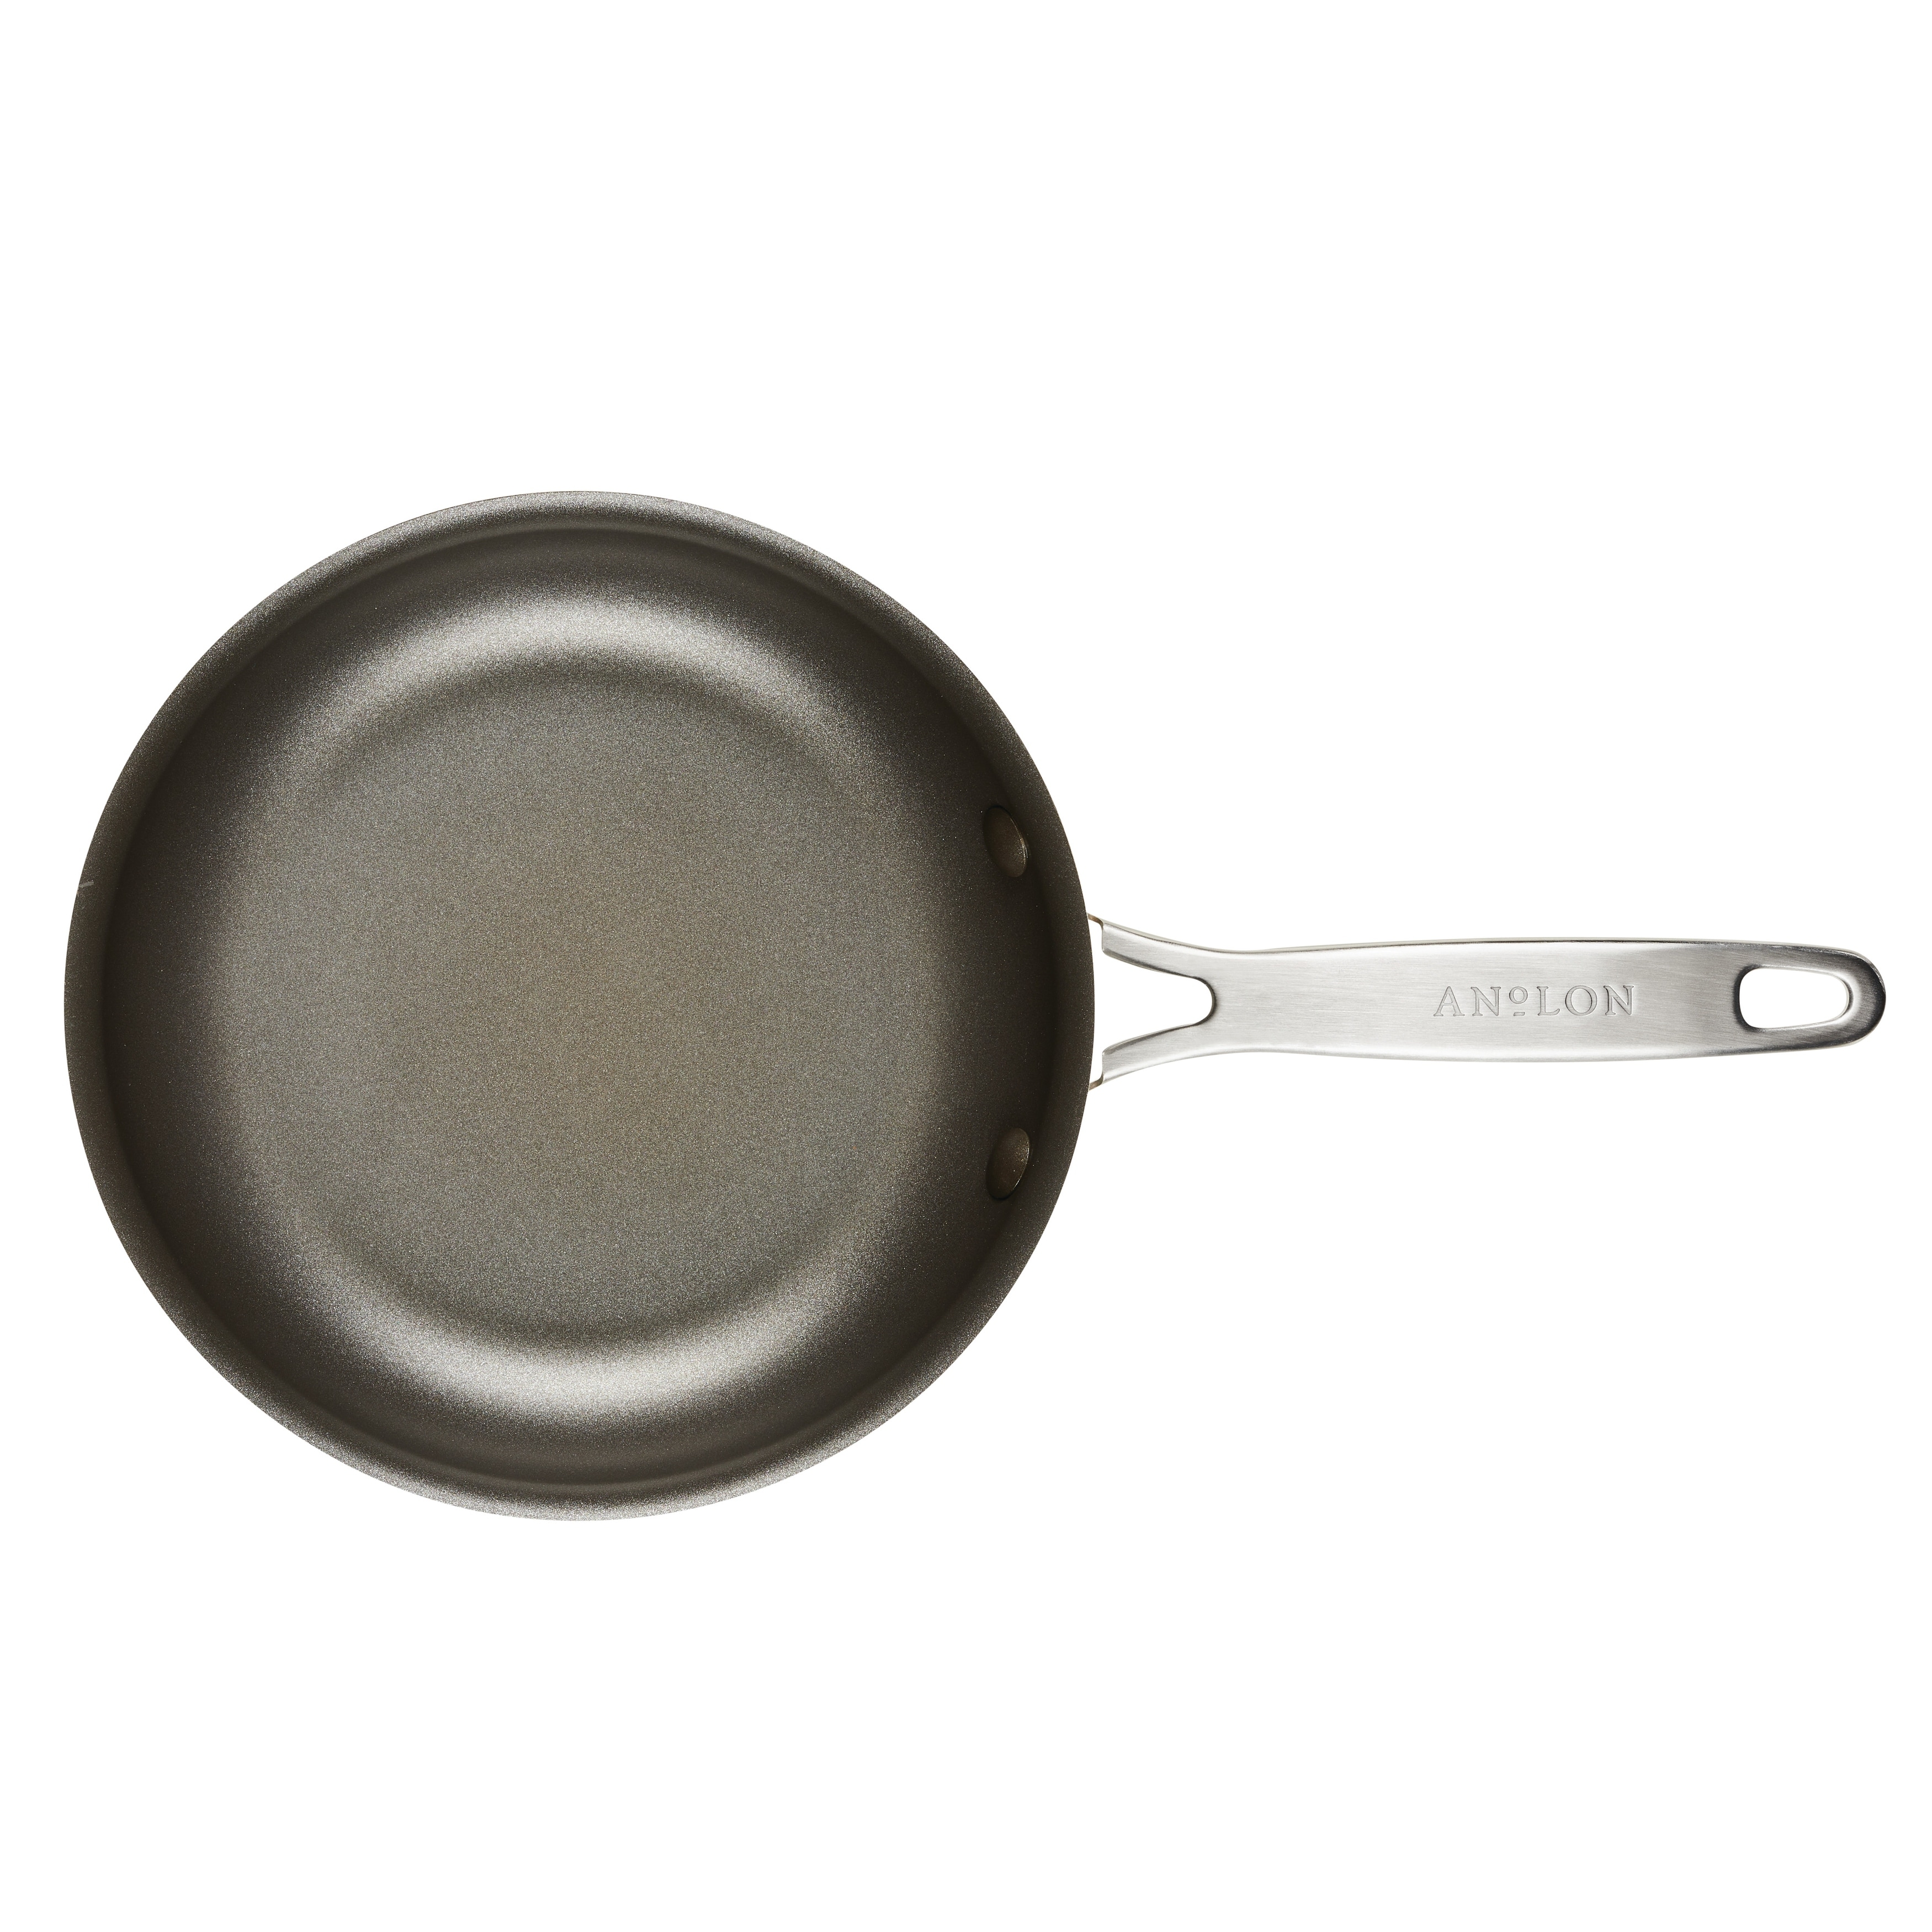 https://ak1.ostkcdn.com/images/products/is/images/direct/f53b6dfc8ad2fb2a114ced692c5eafe72537797c/Anolon-Achieve-Hard-Anodized-Nonstick-Frying-Pan%2C-12-Inch.jpg